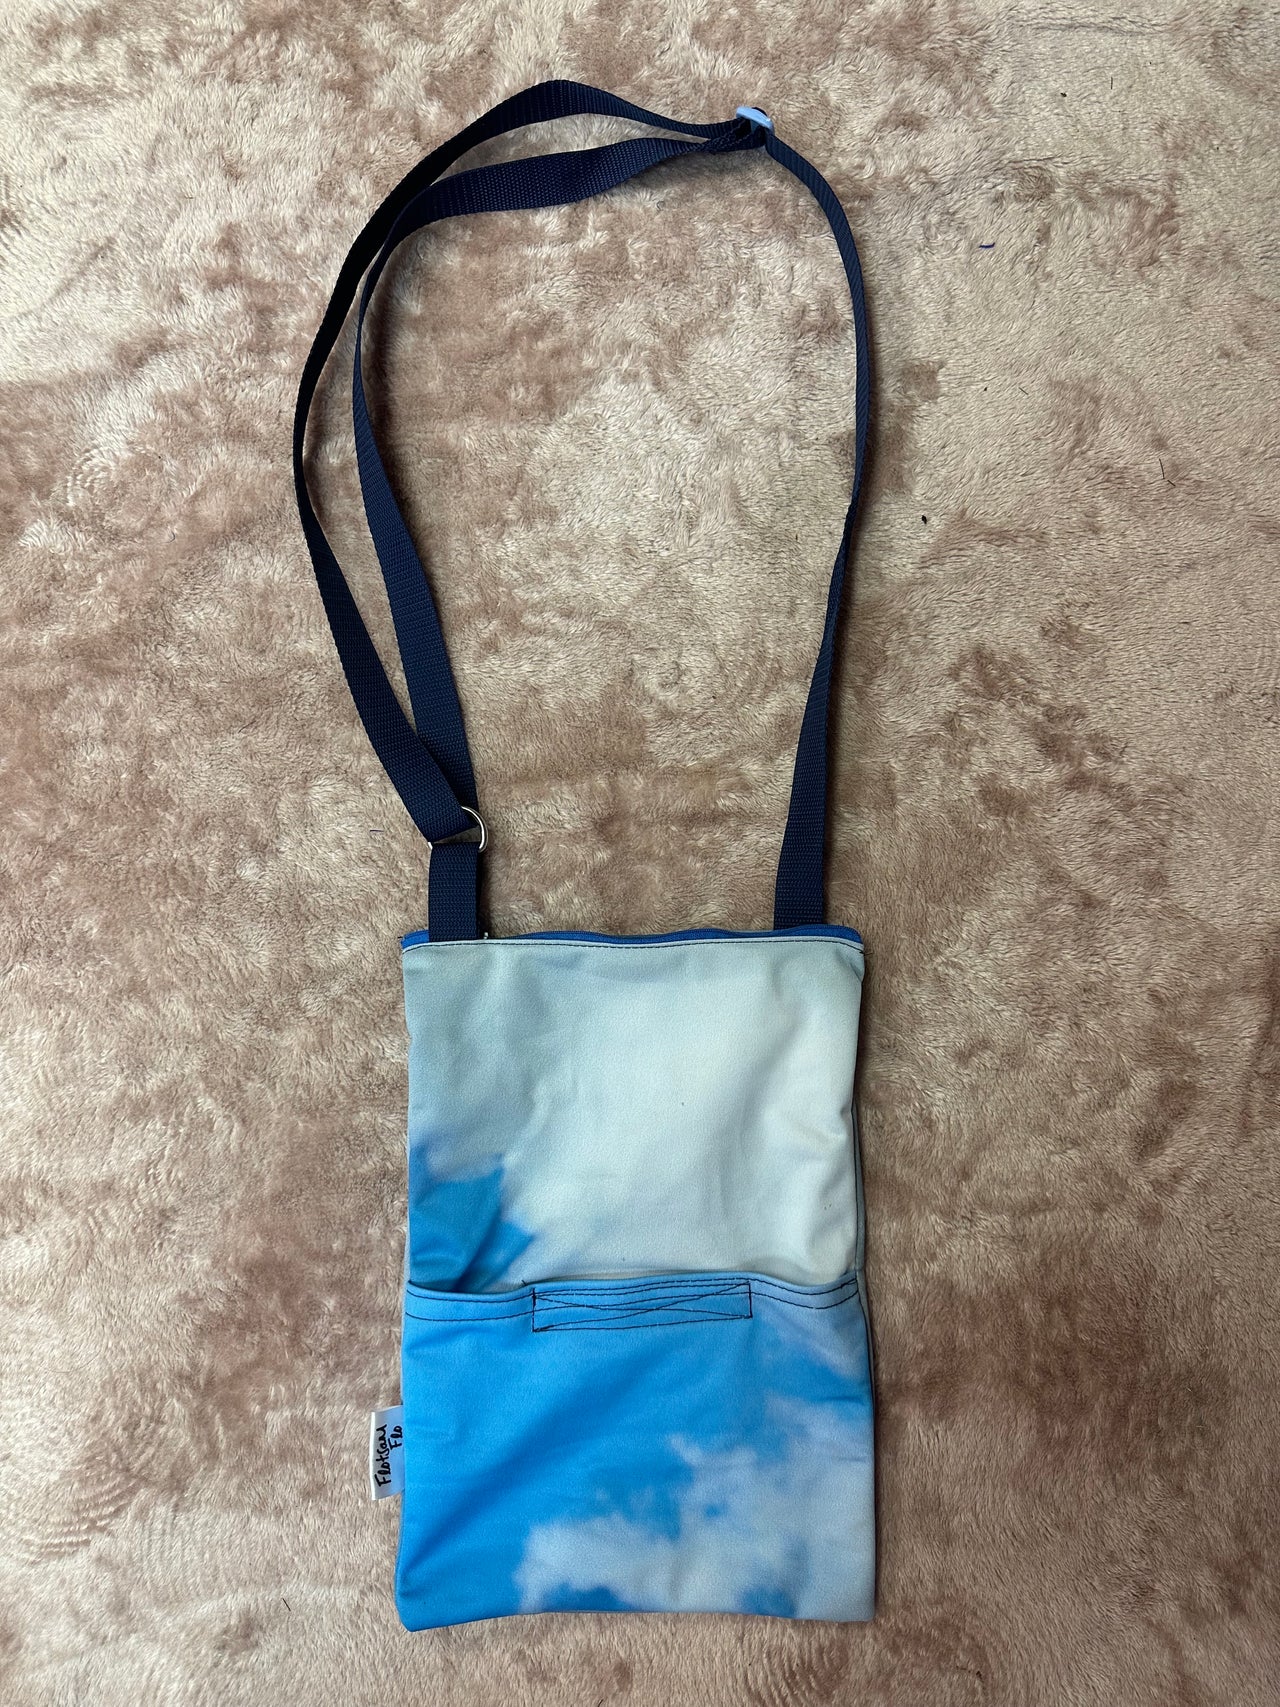 I used to be a Fabric Plastic based Banner - Cloud Cross body bag